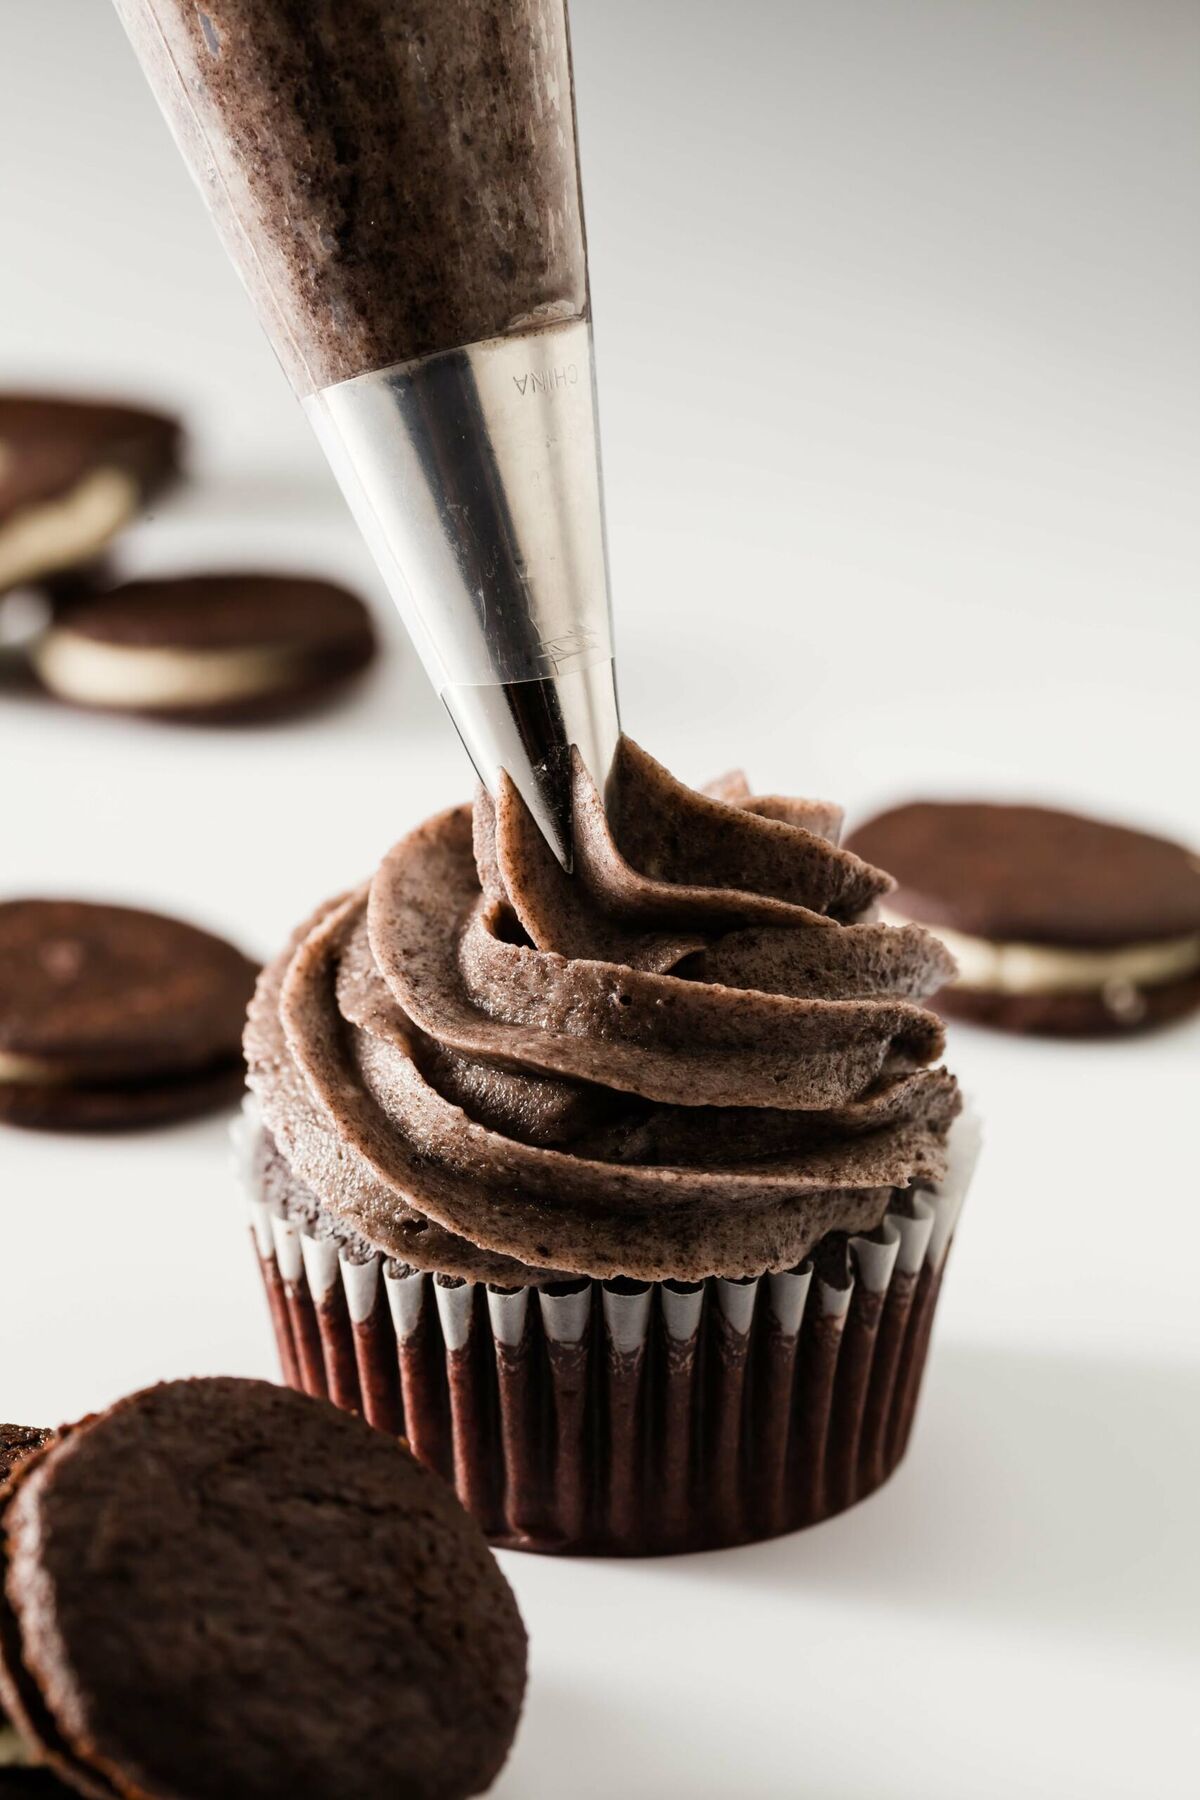 Oreo cookies and cream frosting being piped onto a cupcake